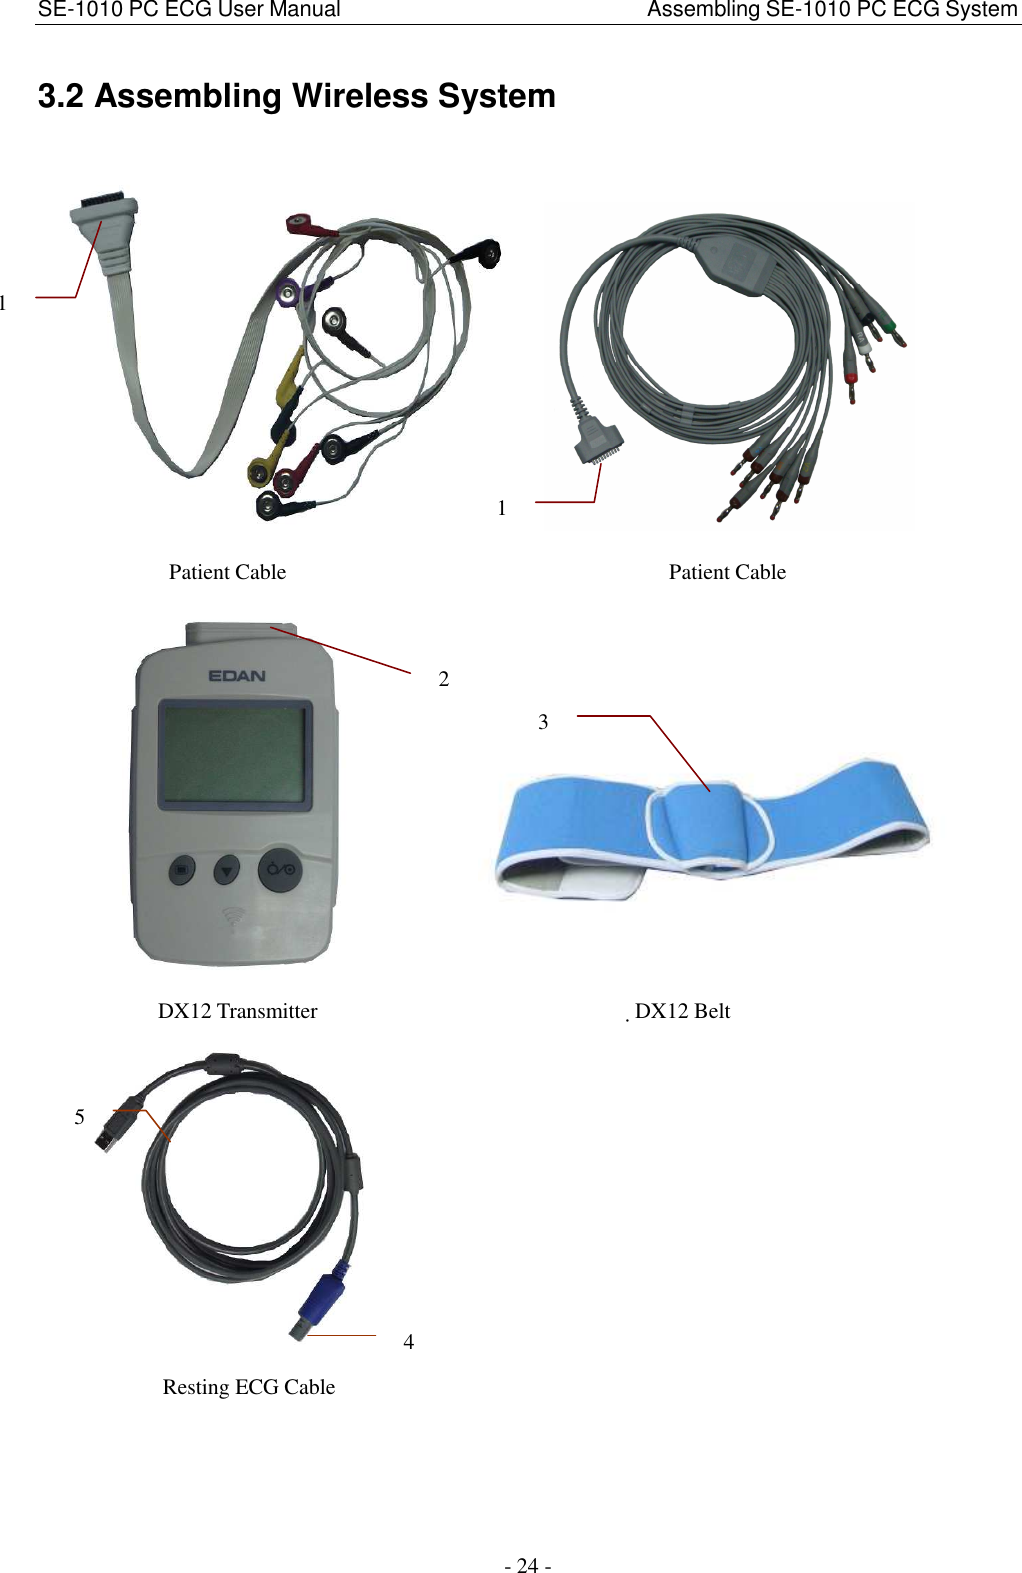 SE-1010 PC ECG User Manual                                                        Assembling SE-1010 PC ECG System - 24 - 3.2 Assembling Wireless System          Patient Cable                                                                      Patient Cable                    DX12 Transmitter                             DX12 Belt                Resting ECG Cable 1 2 3 5 4 1 